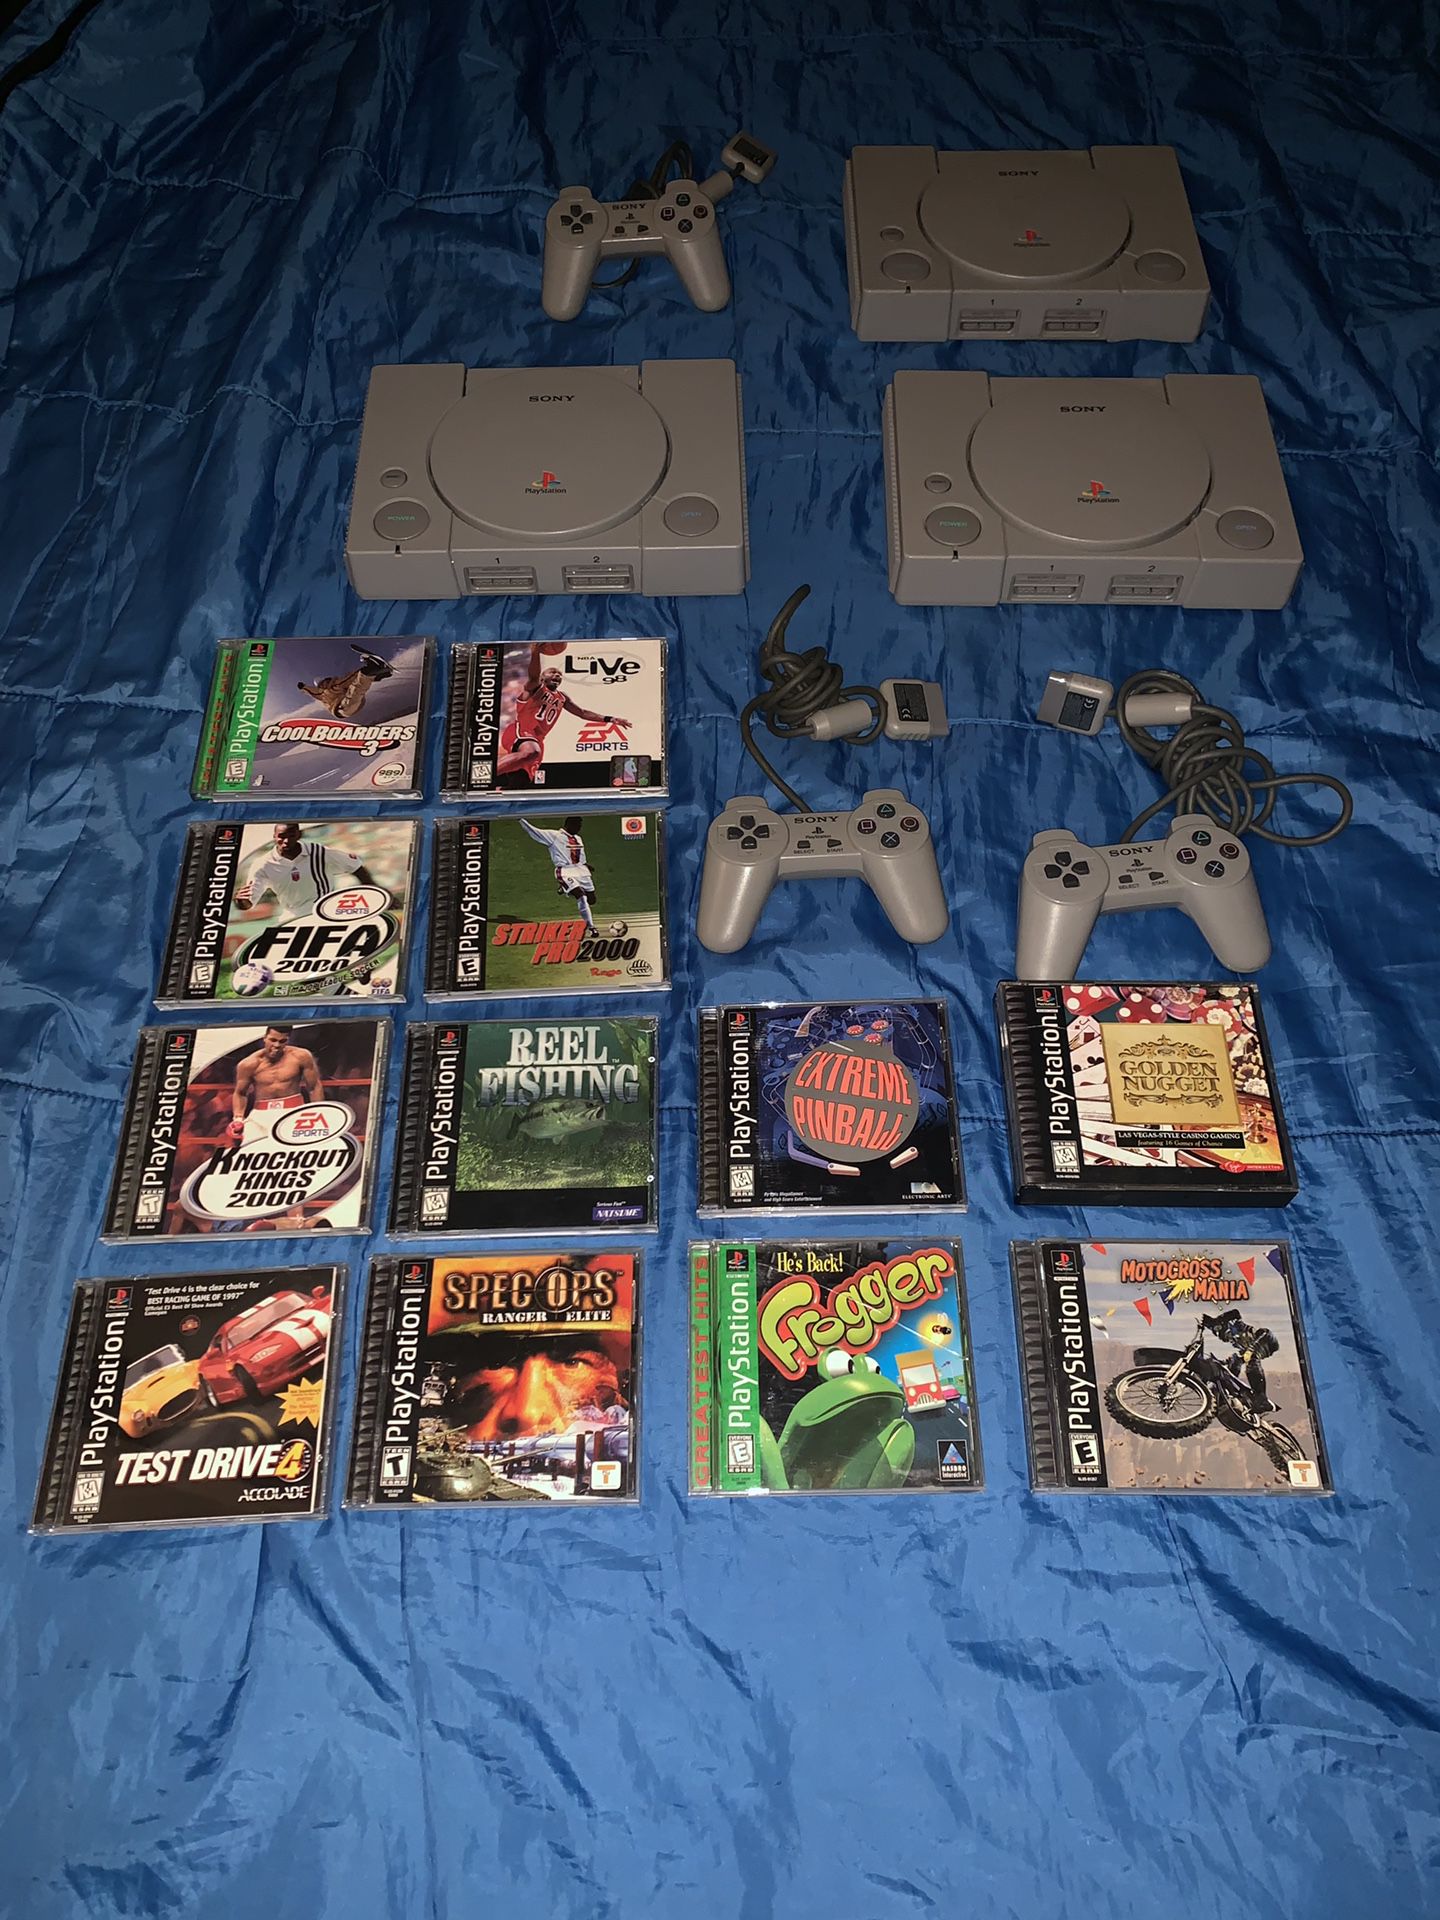 3 PS1 Consoles (they all work and come with cords for each) and 12 games - Everything for $50